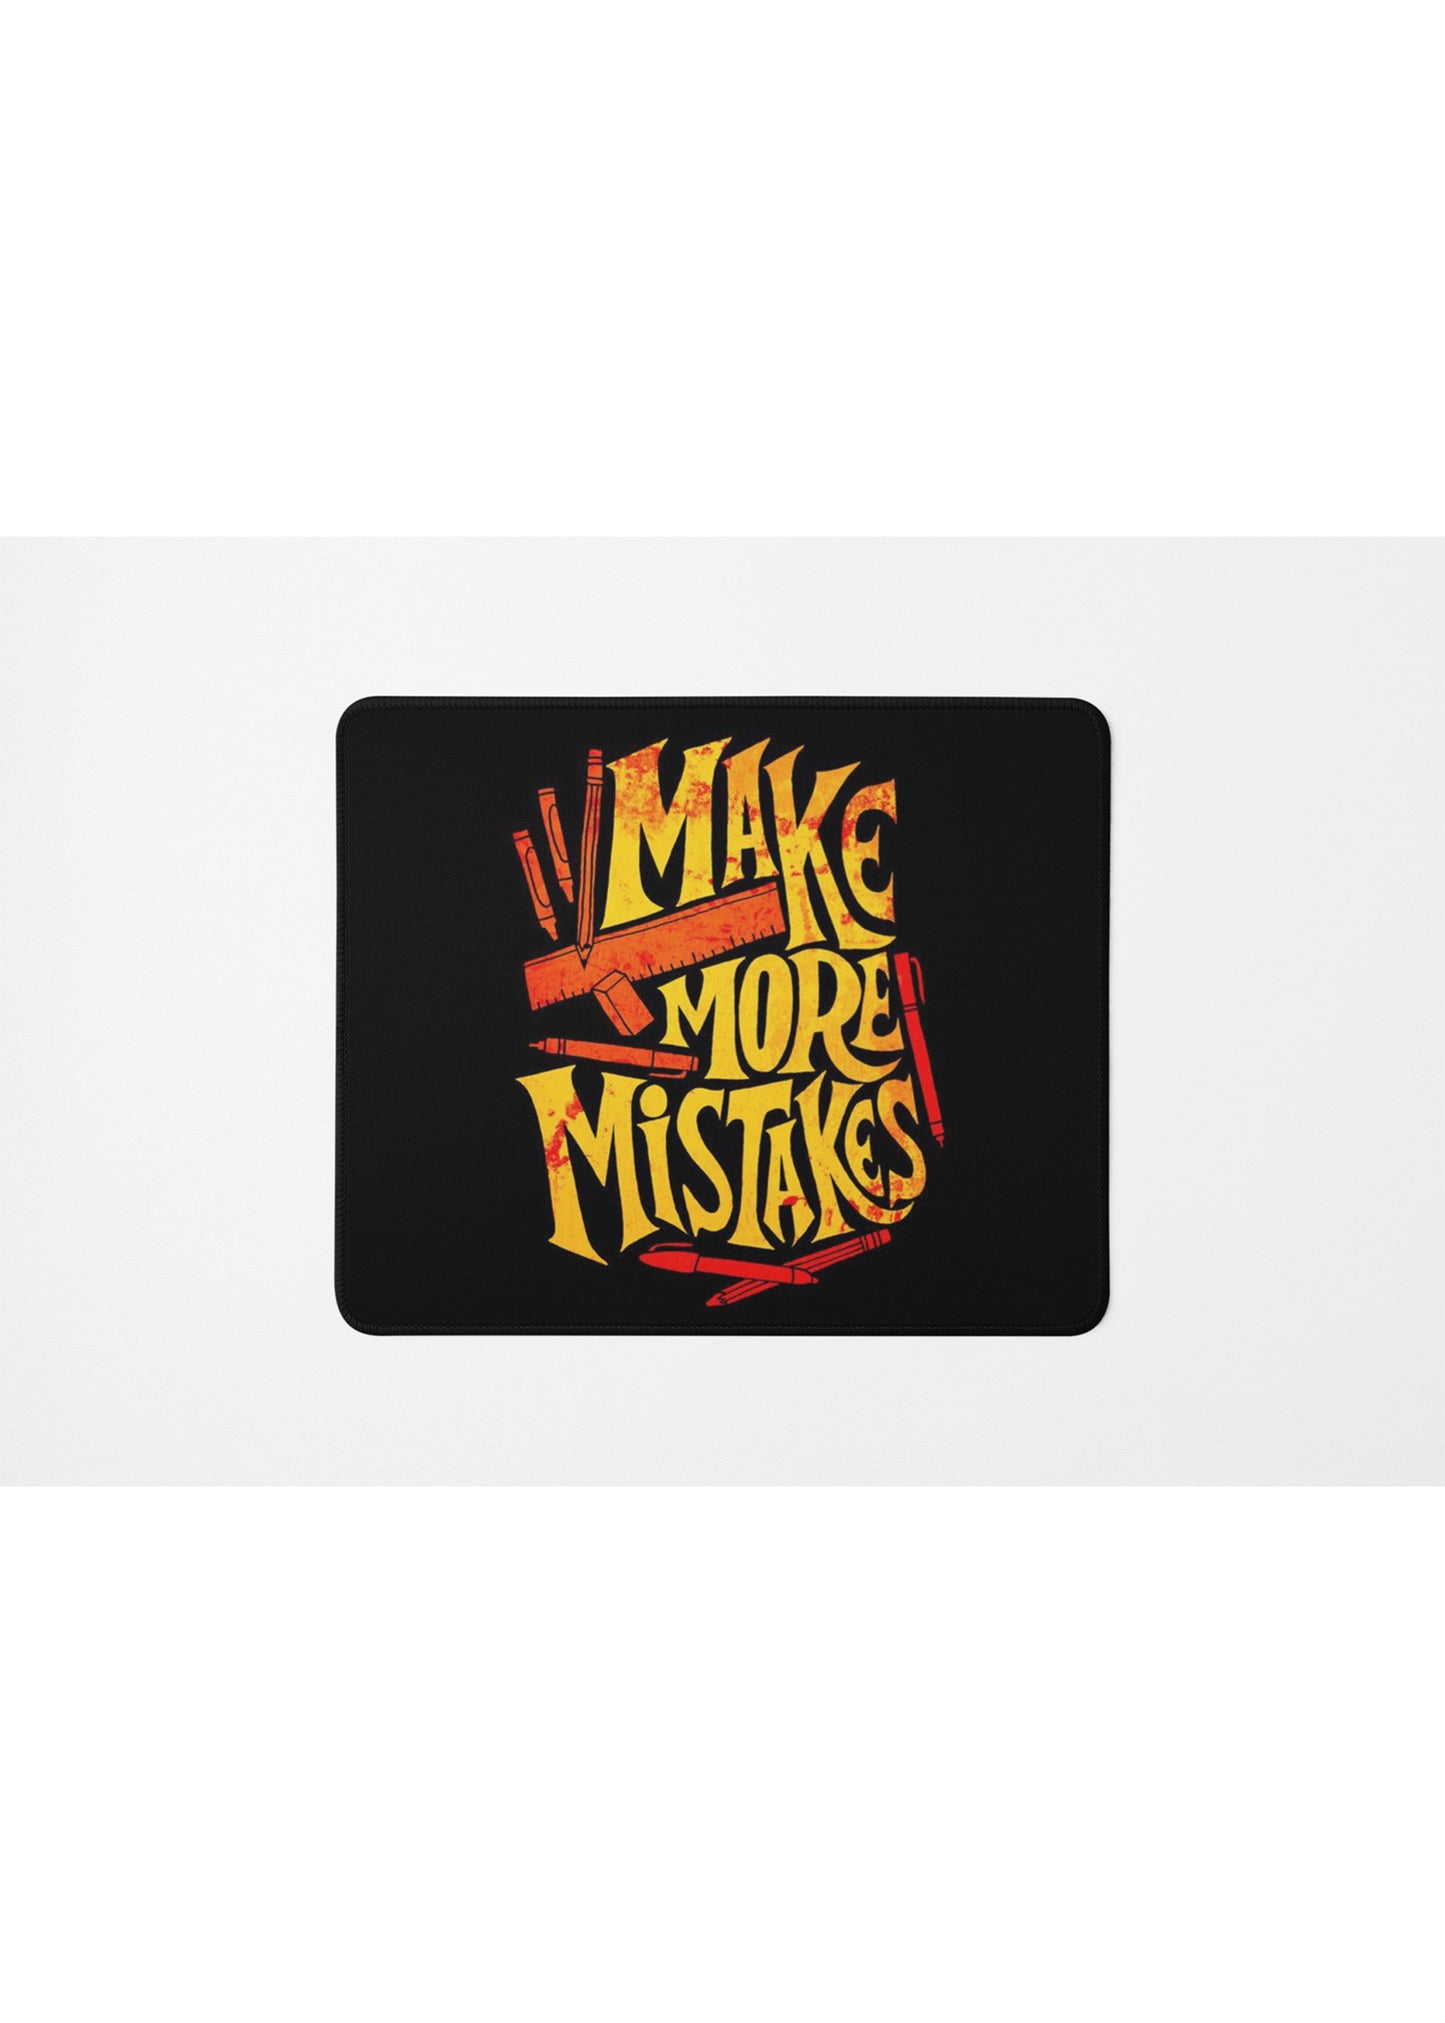 MAKE MORE MISTAKE MOUSE PAD